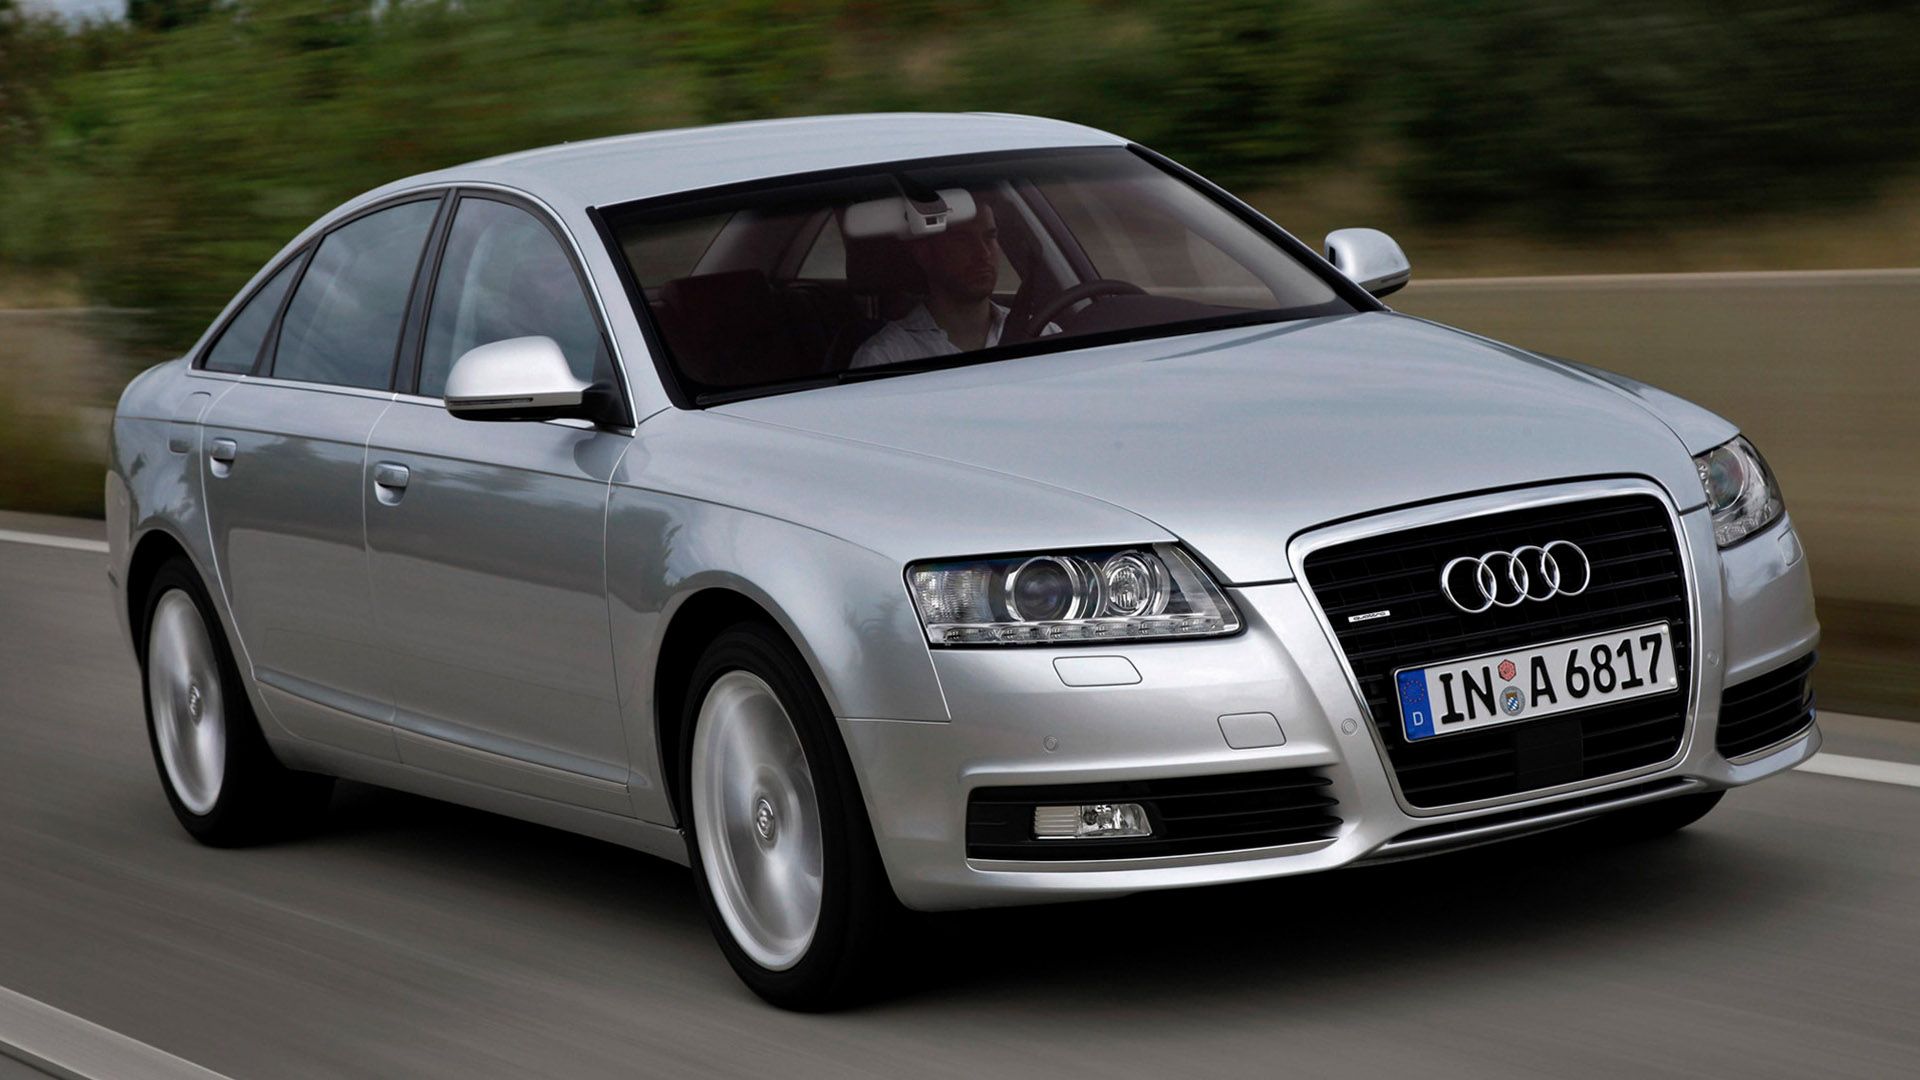 Grey Audi A6 sedan driving on a country road